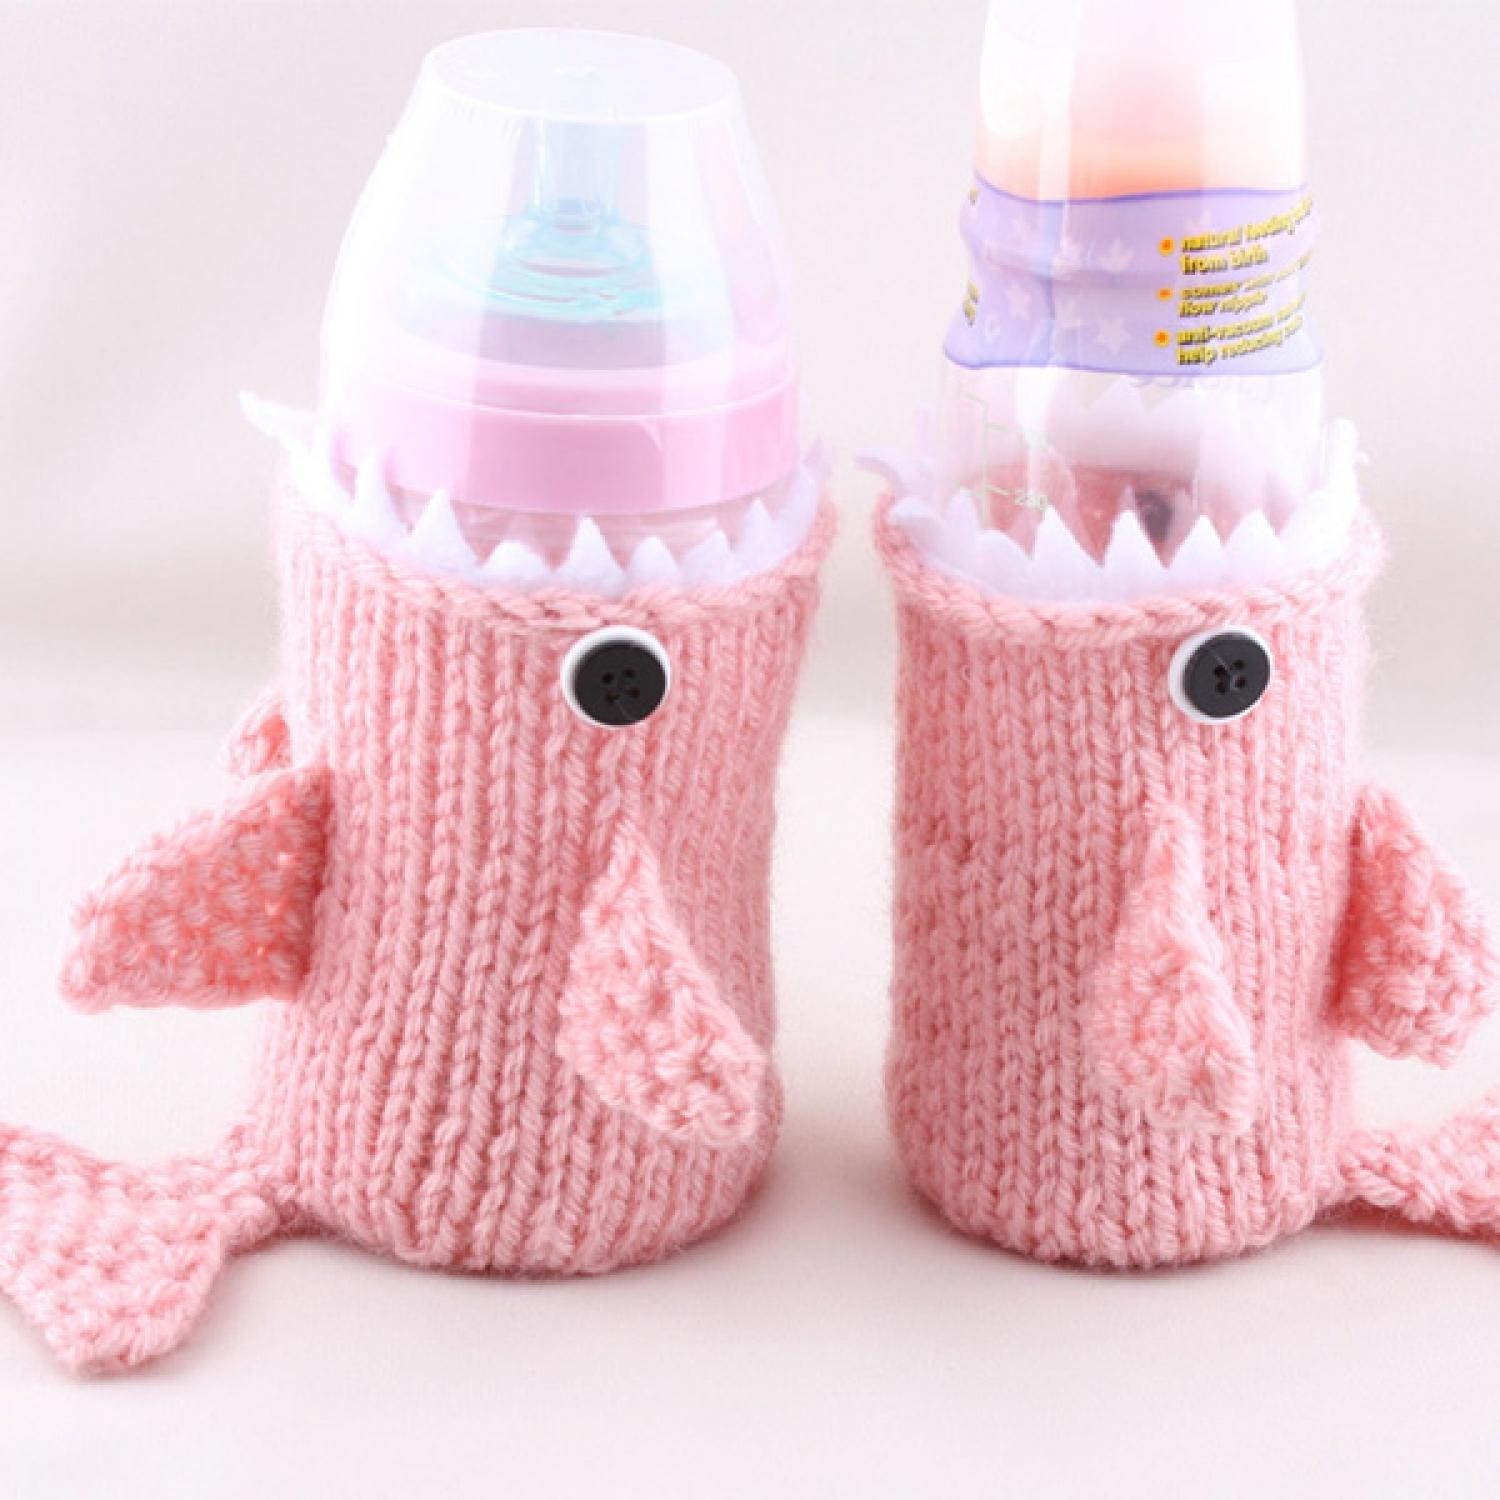 Personal Baby Shower Gift Ideas
 5 Great Baby Shower Gifts Ideas